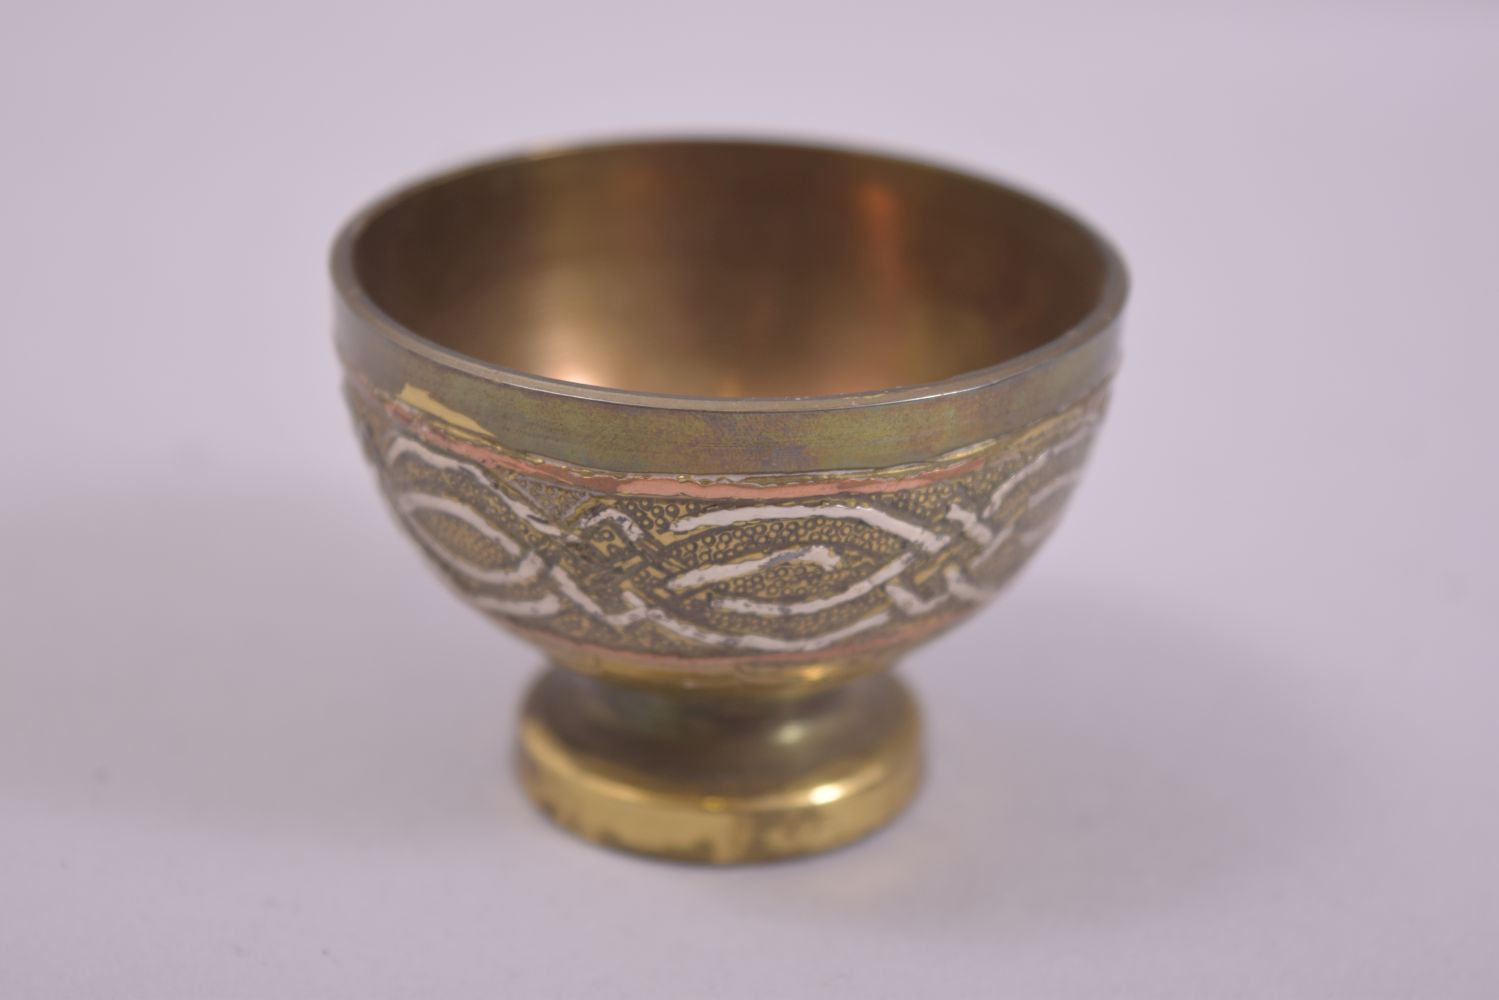 FIVE 19TH CENTURY SYRIAN SILVER AND COPPER OVERLAID PEDESTAL CUPS, diameter 5.5cm. - Image 2 of 8